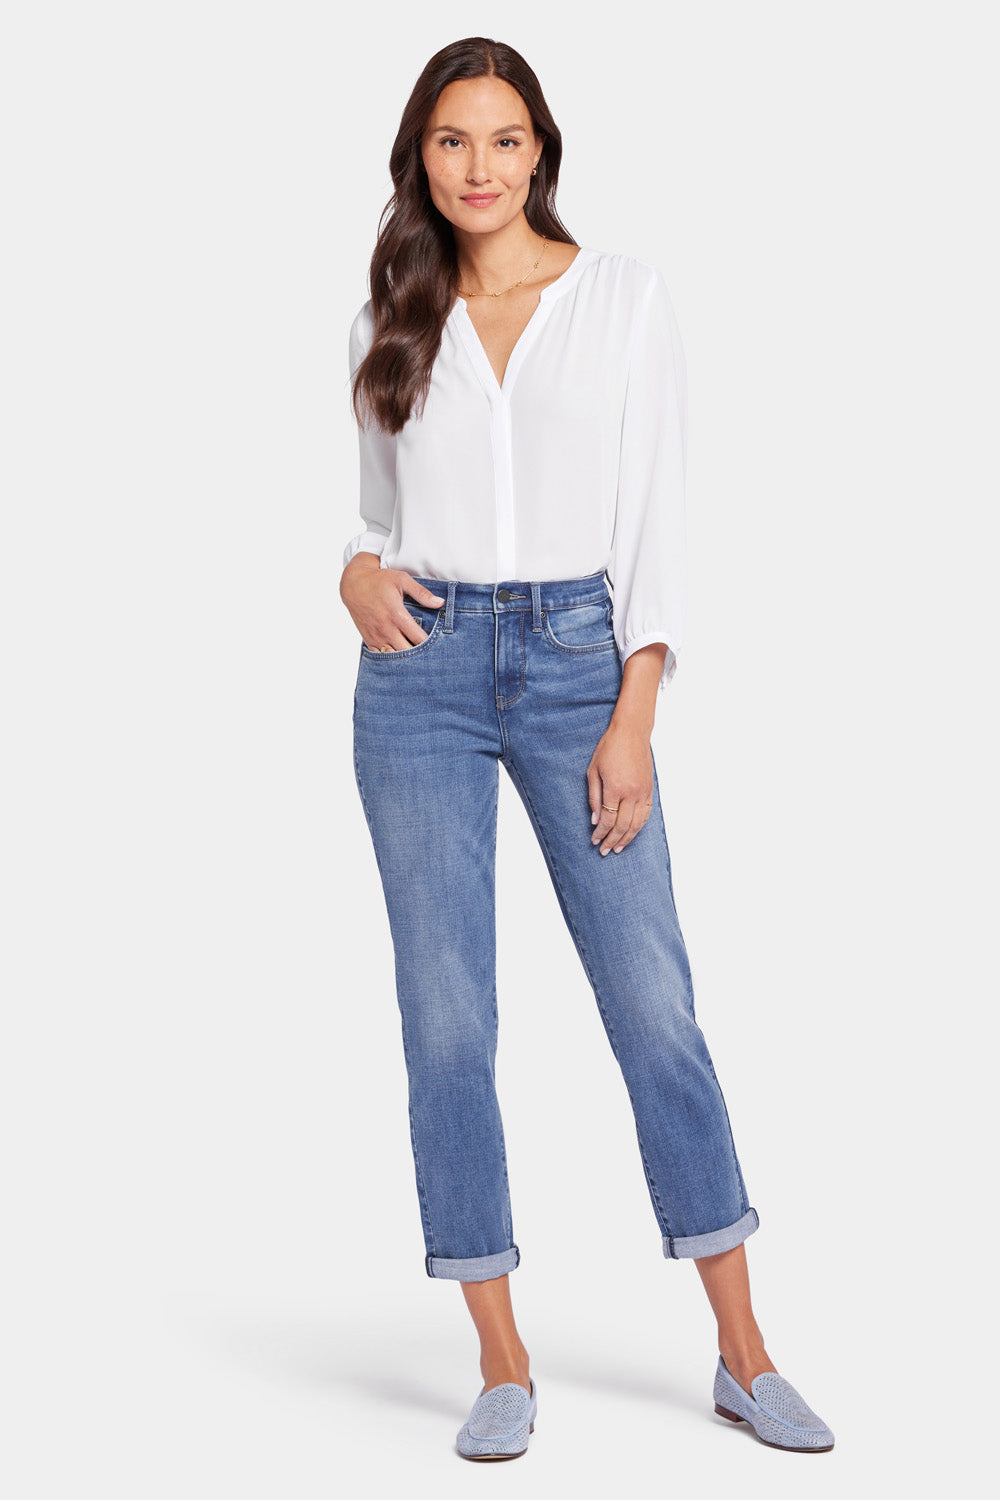 Shop Women's Girlfriend Jeans - Relaxed Slim Straight Fit